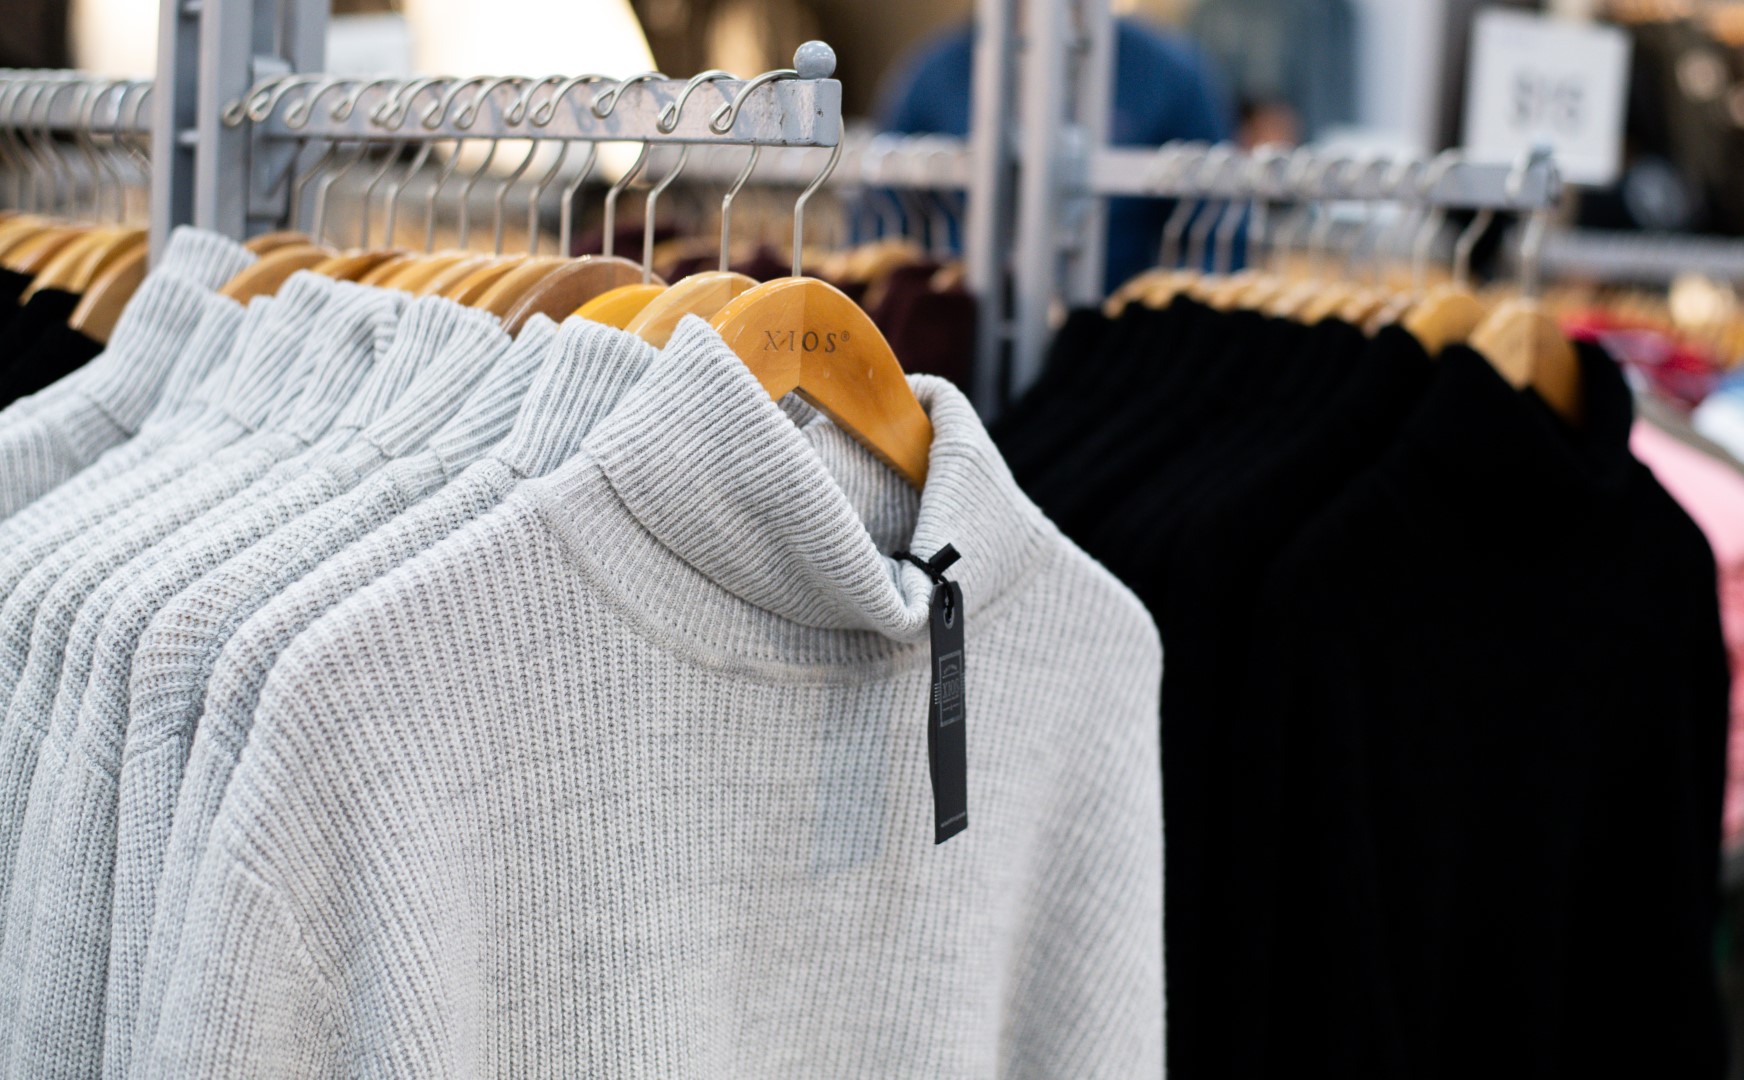 A row of sweaters on hangers in a clothing store, featuring a prominent textured gray sweater in the foreground and various darker clothes in the background.